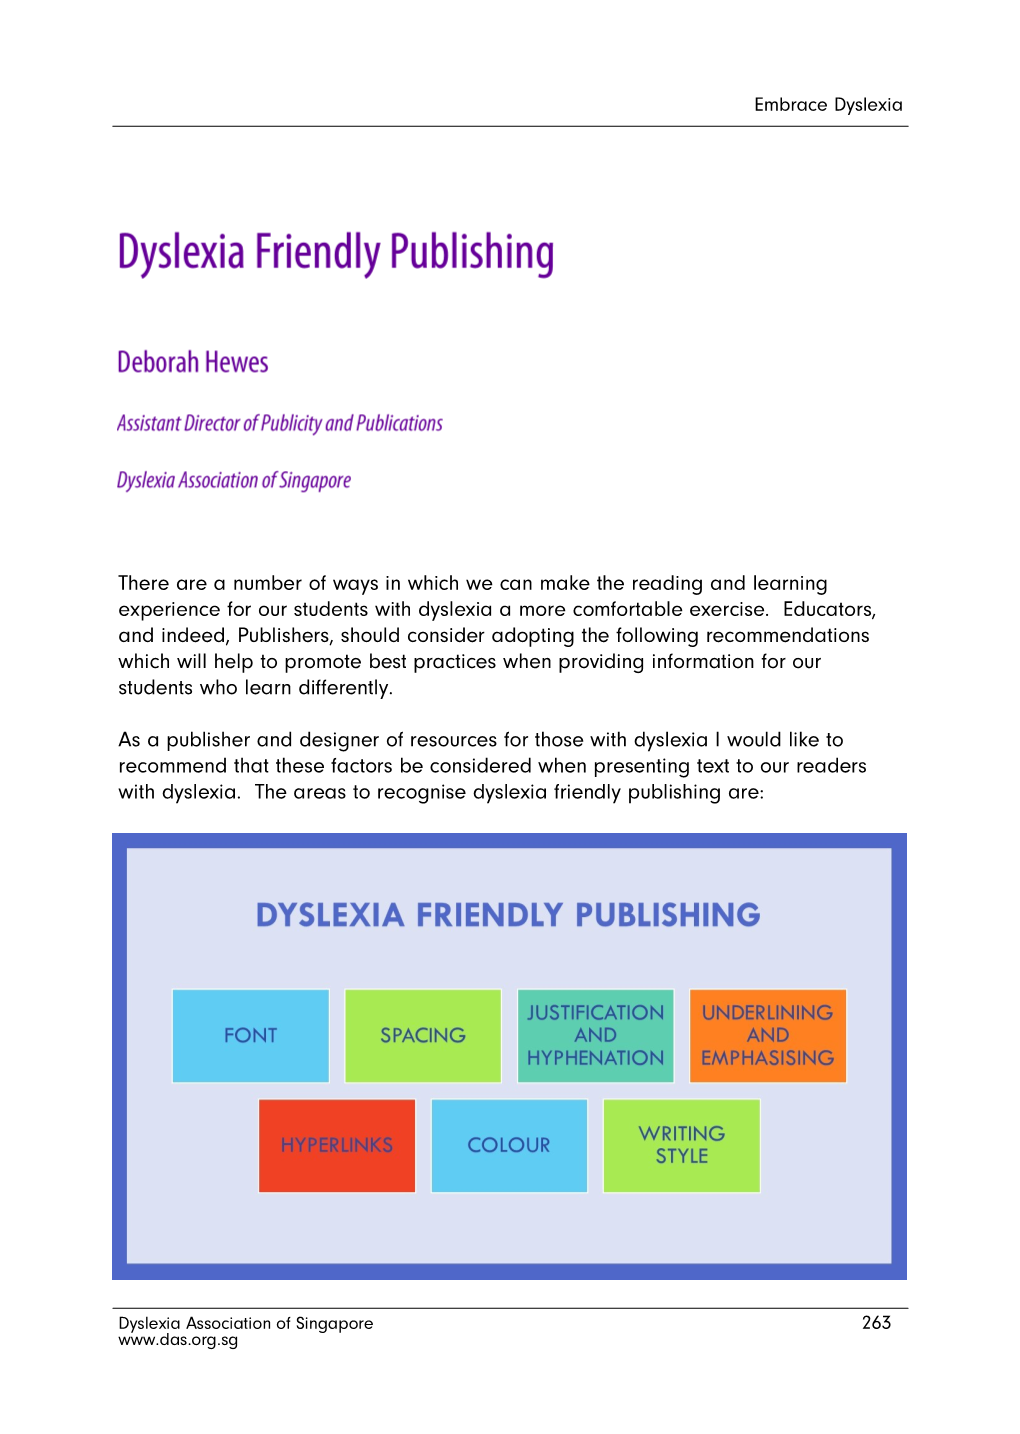 There Are a Number of Ways in Which We Can Make the Reading and Learning Experience for Our Students with Dyslexia a More Comfortable Exercise